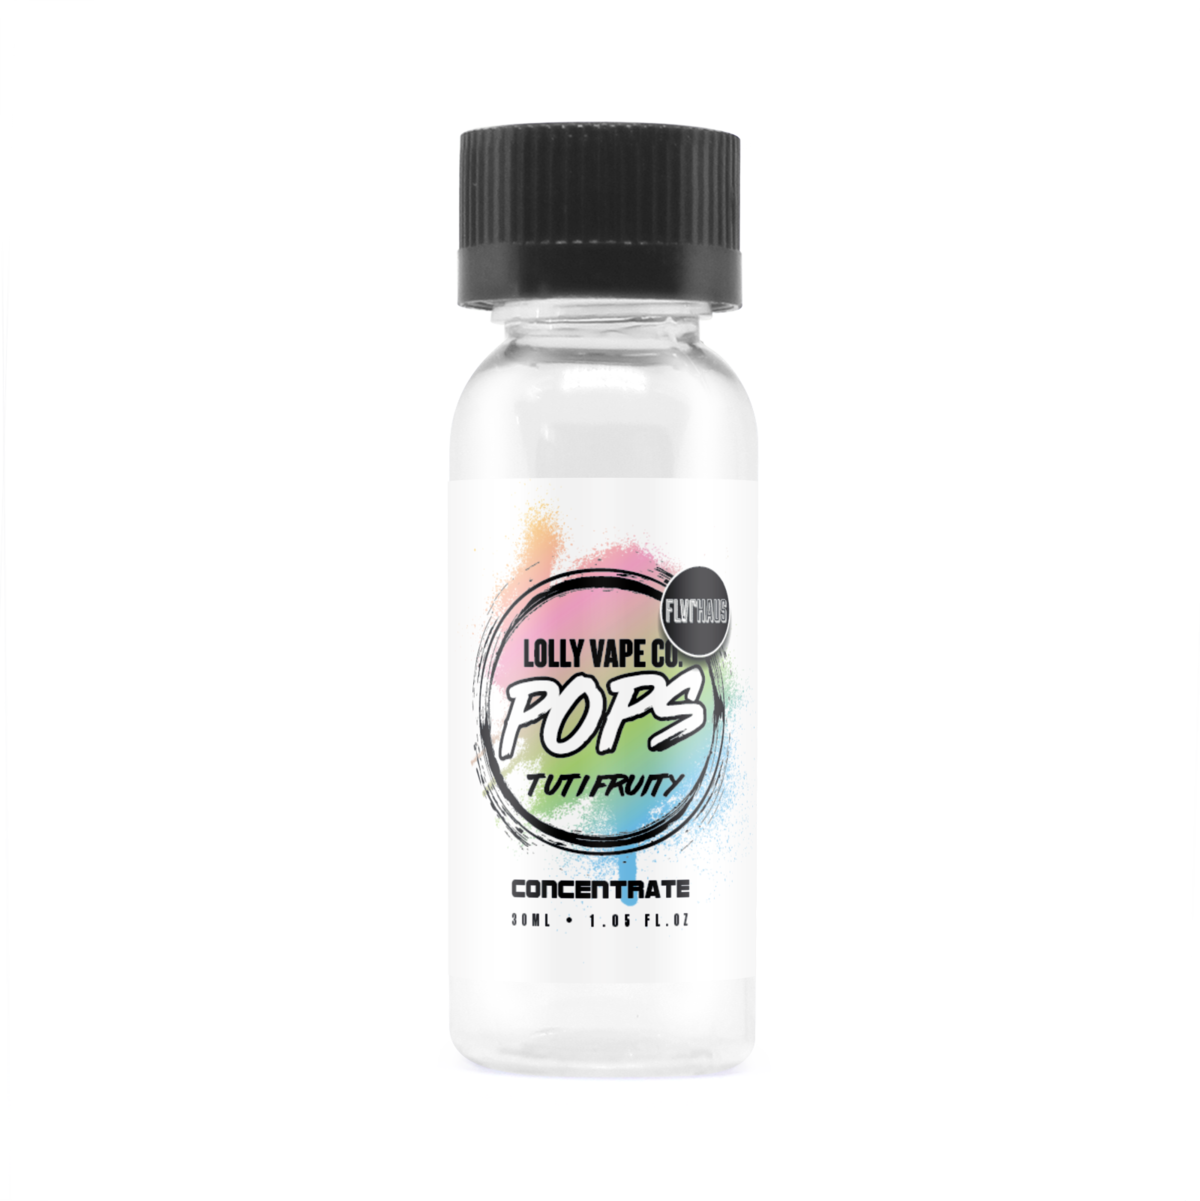 Tutti Fruity Ice Concentrate E-liquid by Lolly Vape Co 30ml